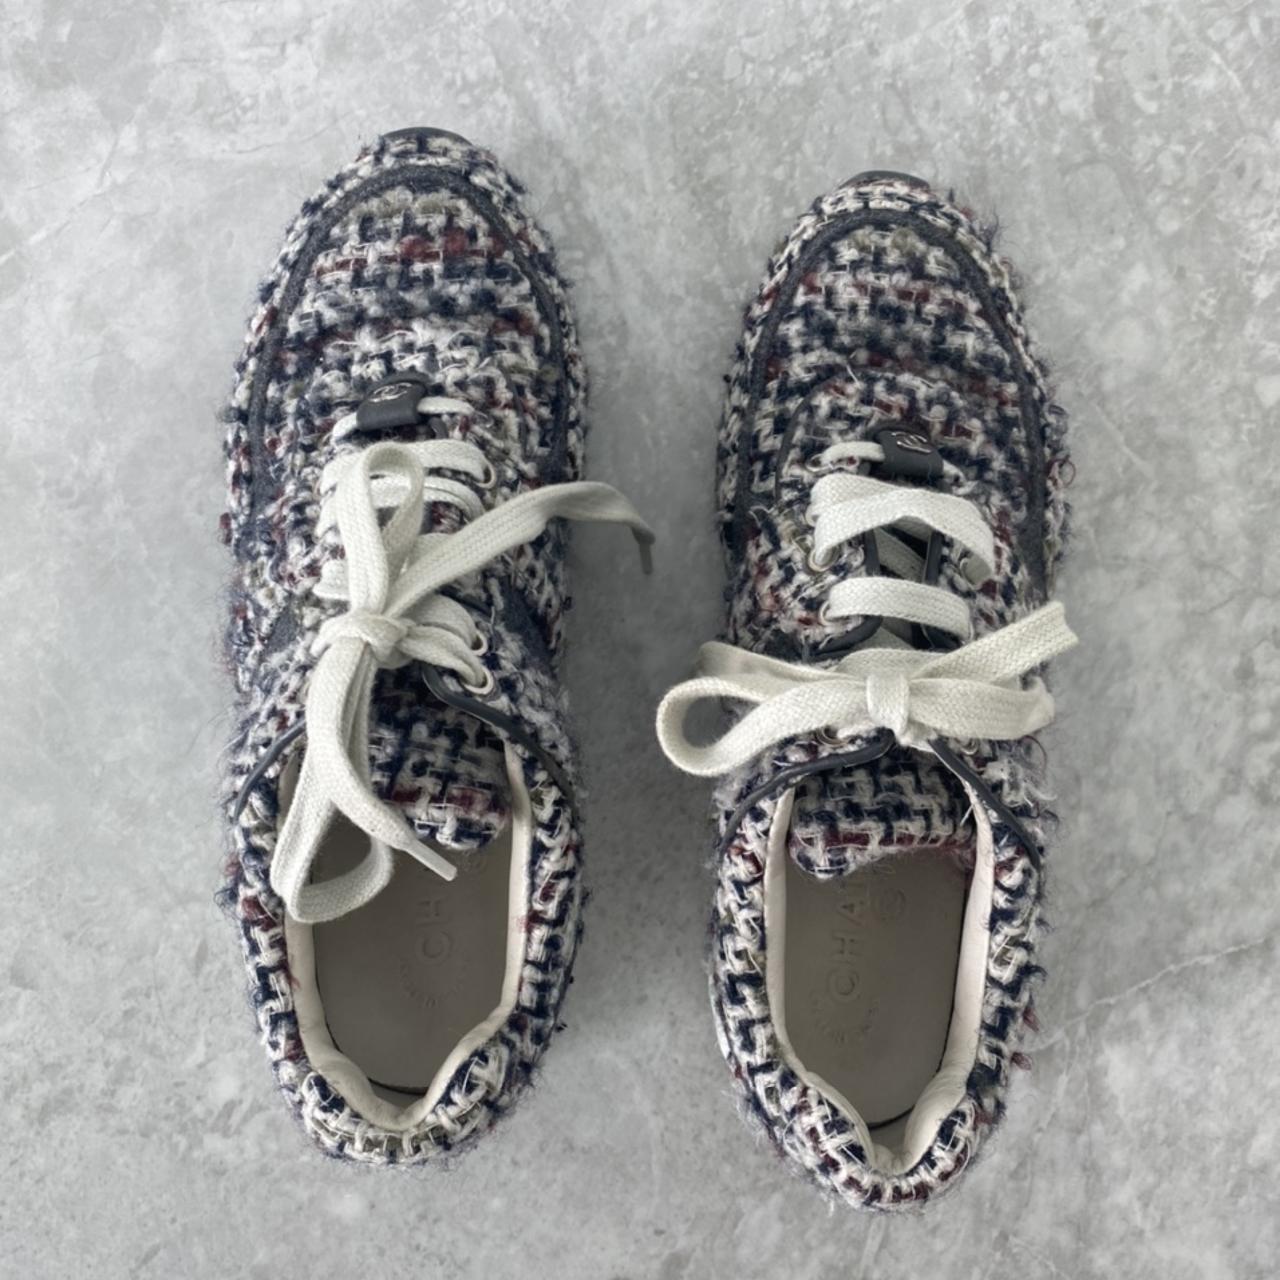 Chanel Tweed white and grey sneakers #chanel